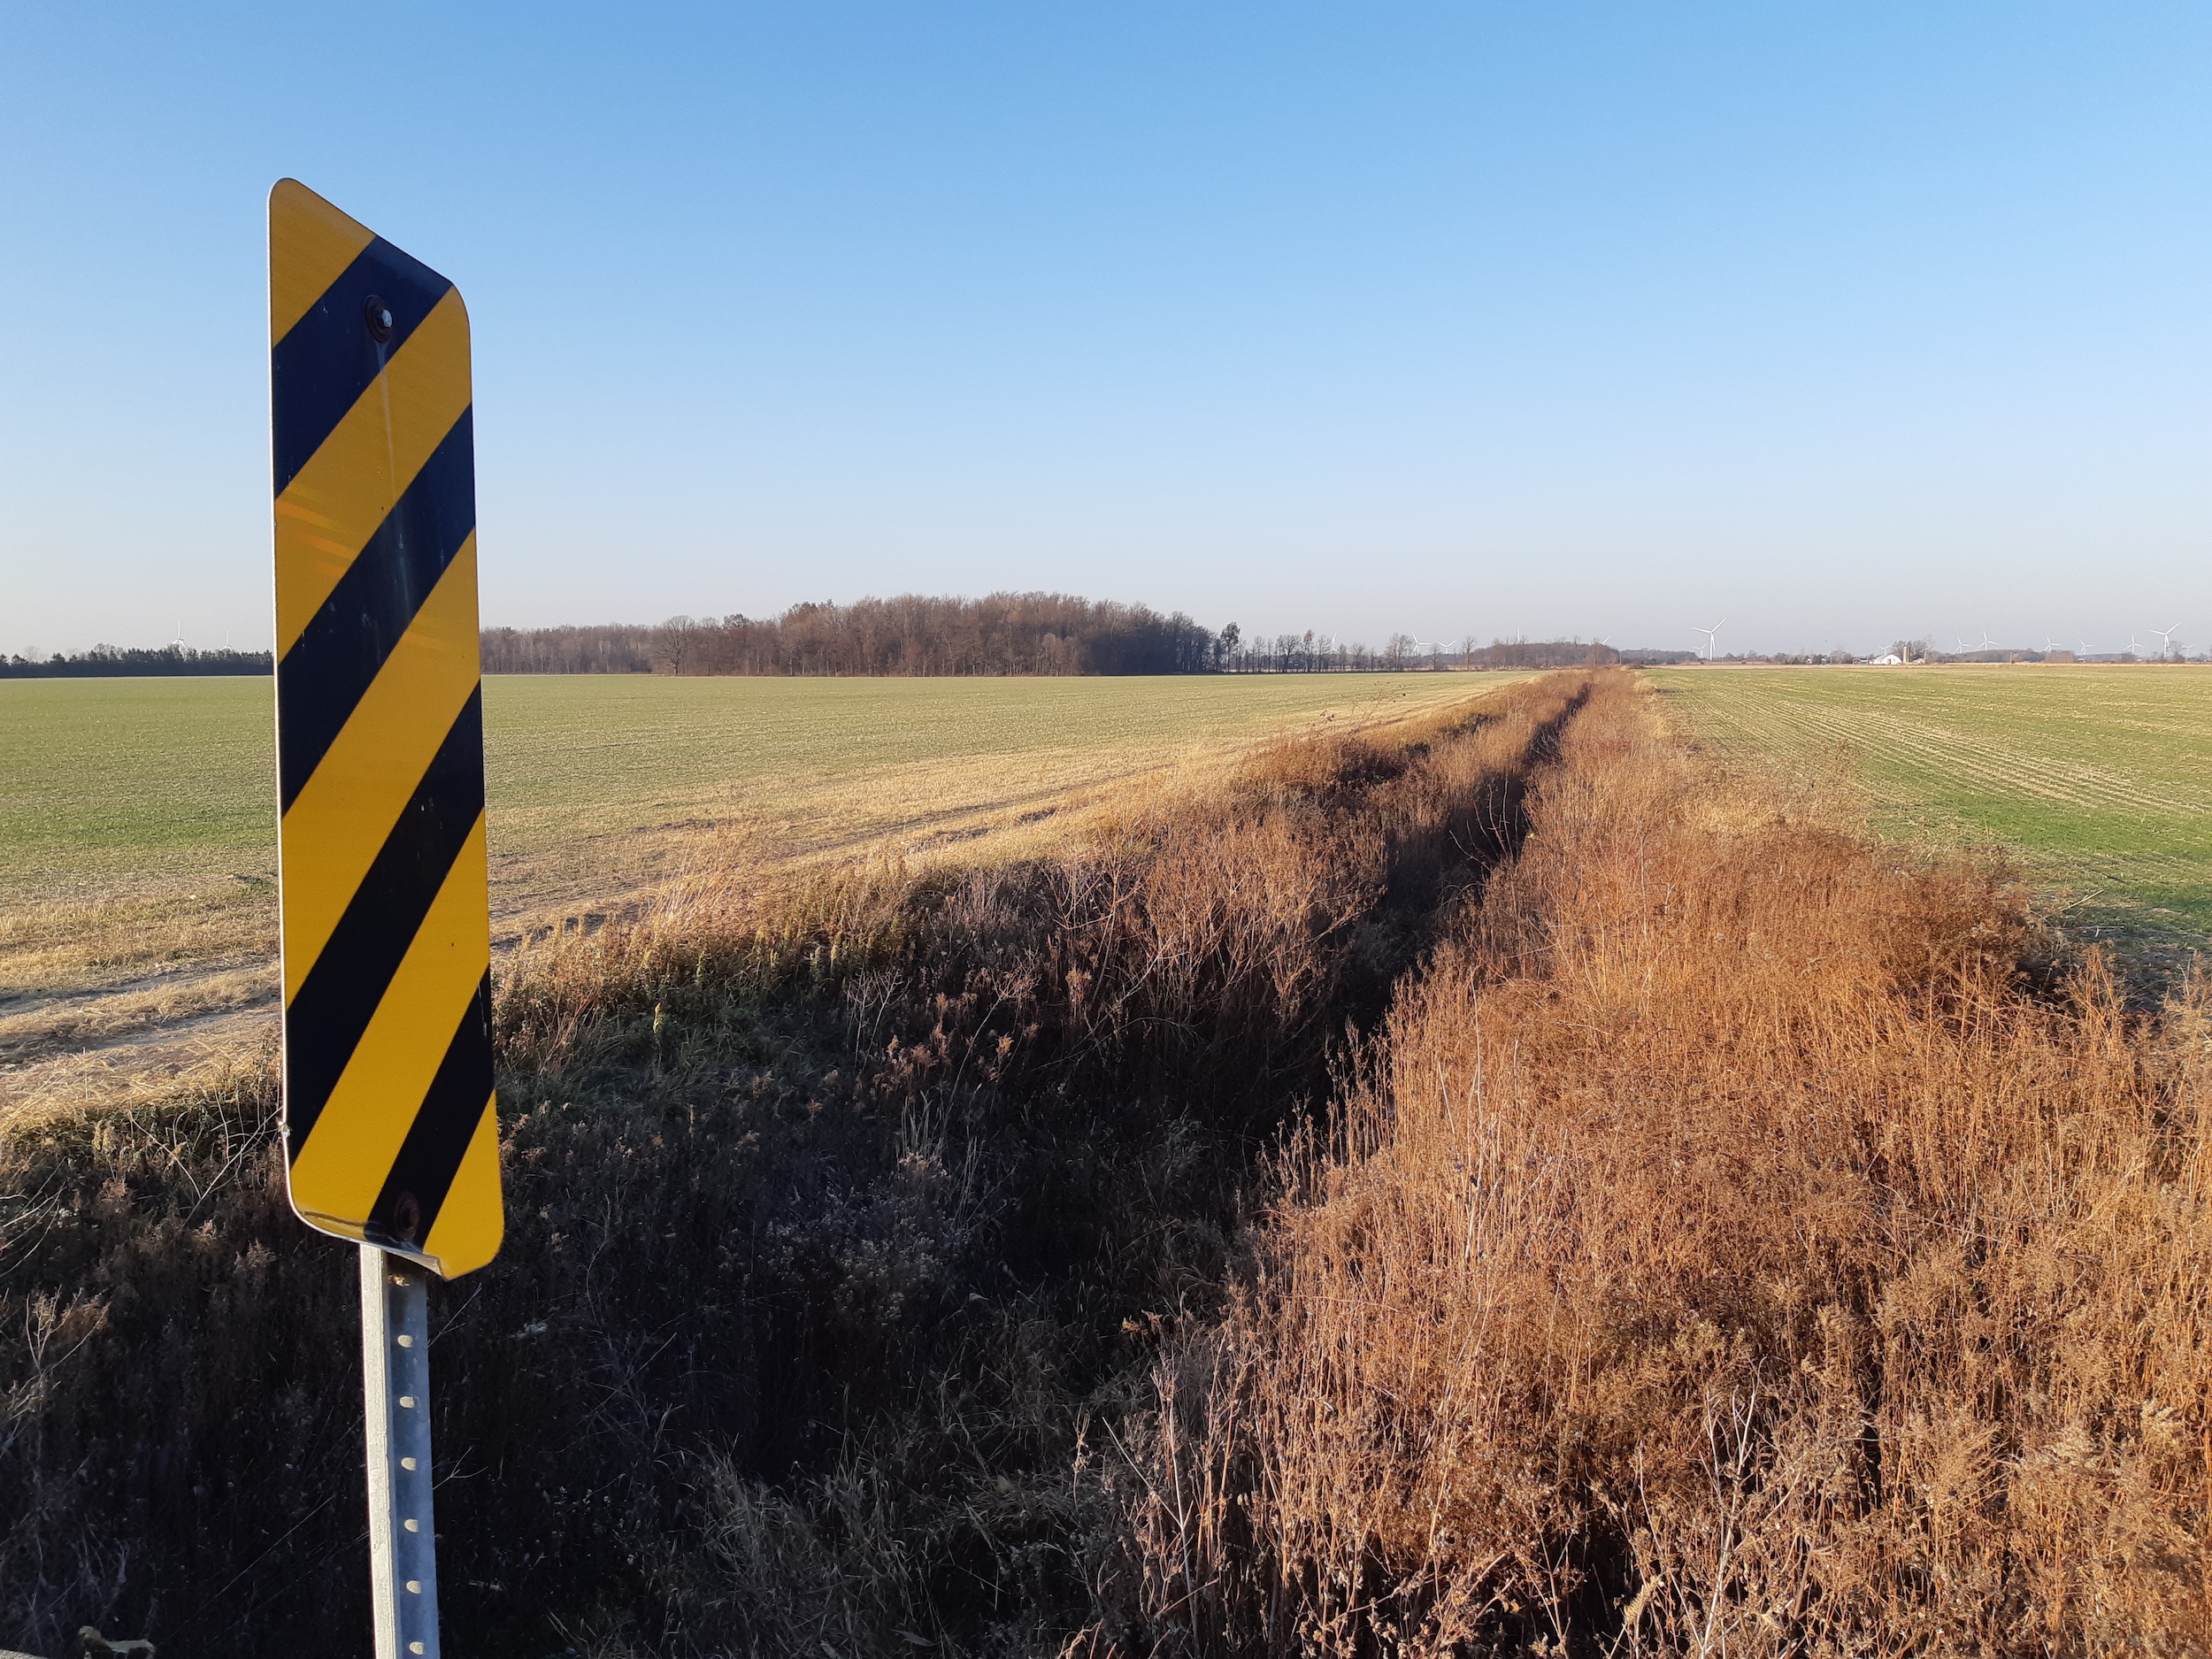 Municipal governments in Ontario have a habit of dredging and clear-cutting vegetation around ditches, which doesn’t exactly inspire landowners to make long-term investments in field edges along such waterways.